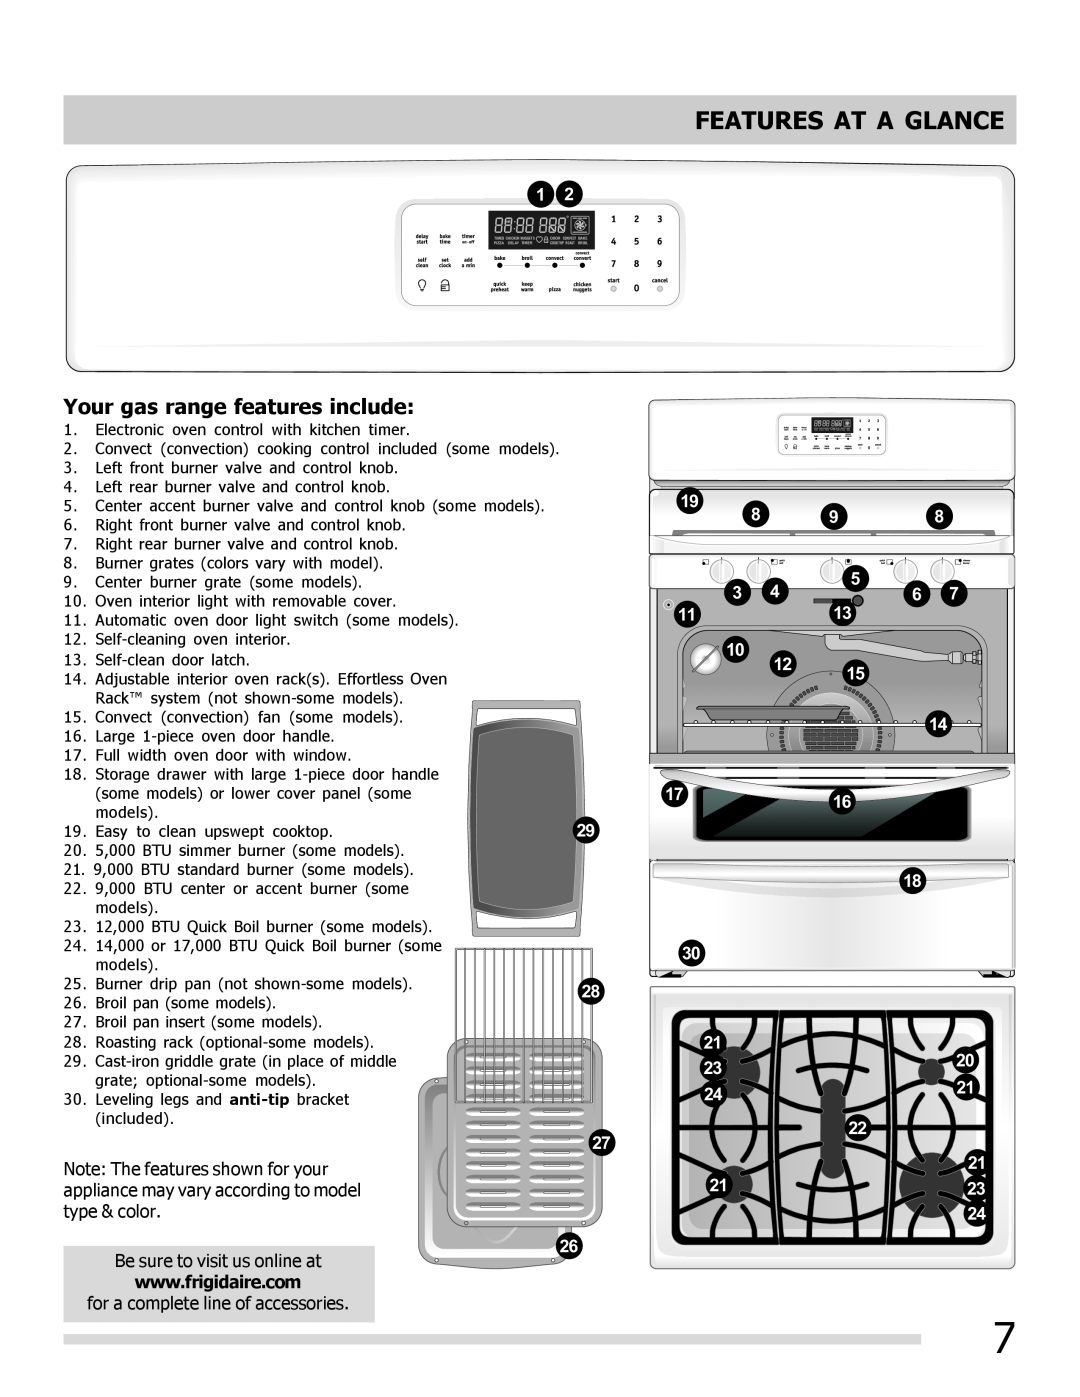 Frigidaire CGGF3054KF, 316901300 important safety instructions Features At A Glance, Your gas range features include 